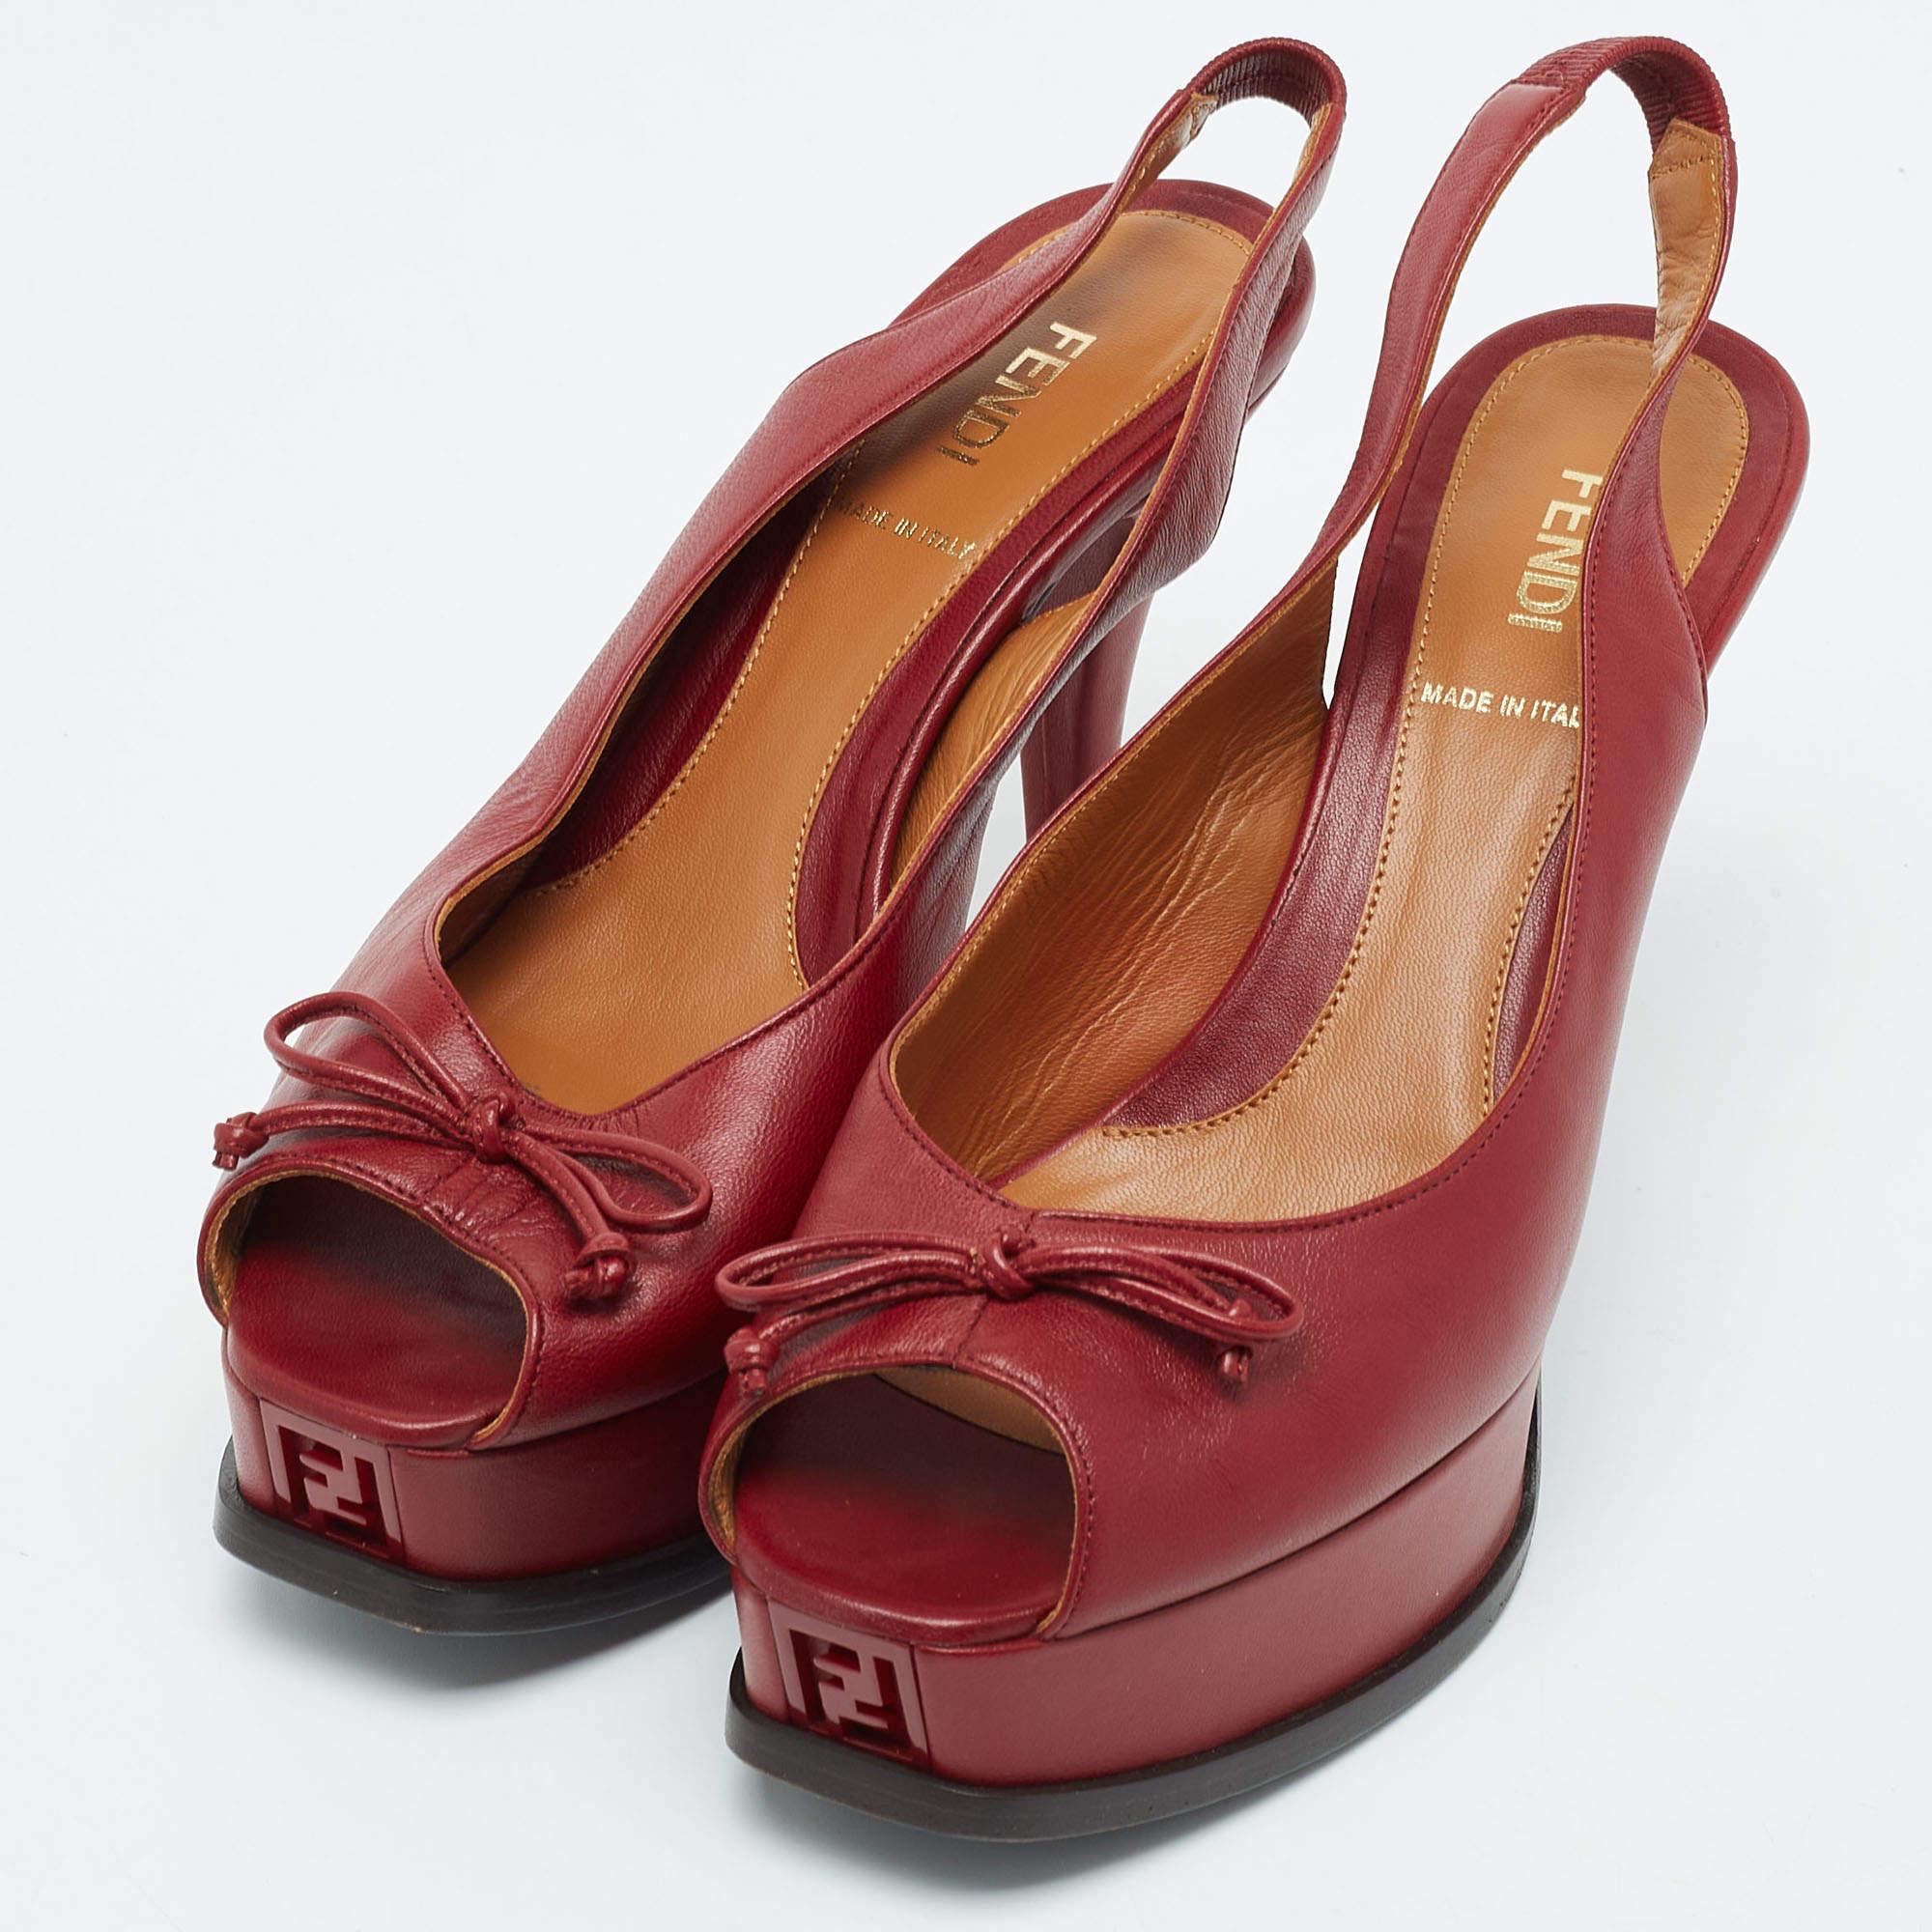 Exhibit an elegant style with this pair of pumps. These Fendi burgundy shoes for women are crafted from quality materials. They are set on durable soles and sleek heels.

